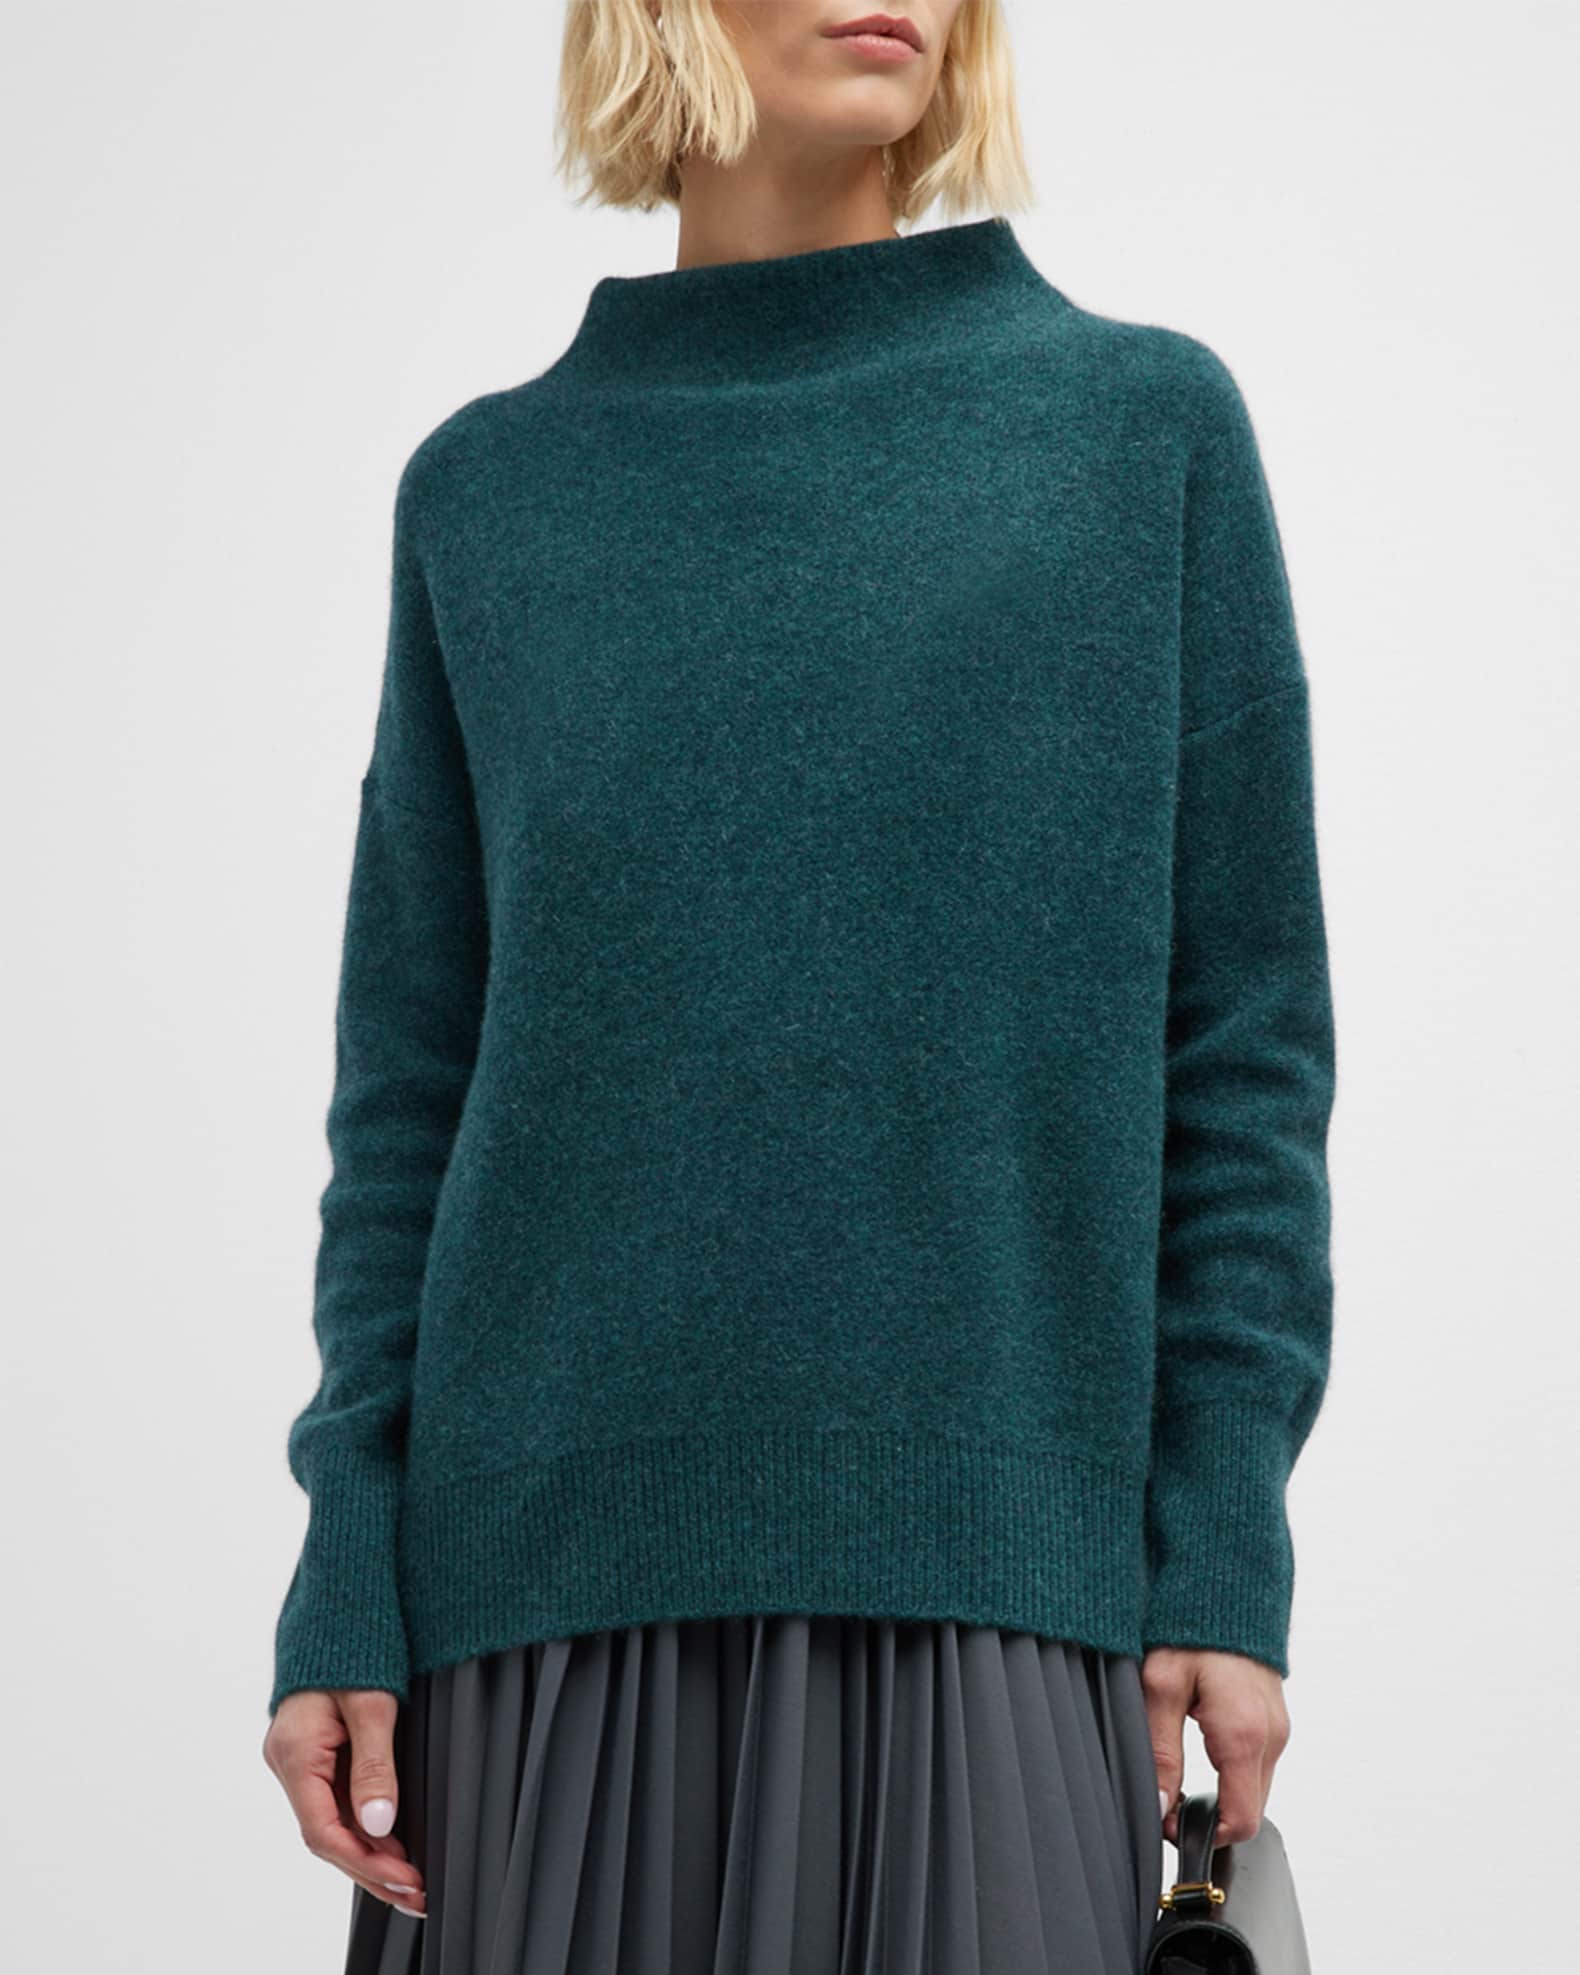 Forest green cashmere sweater